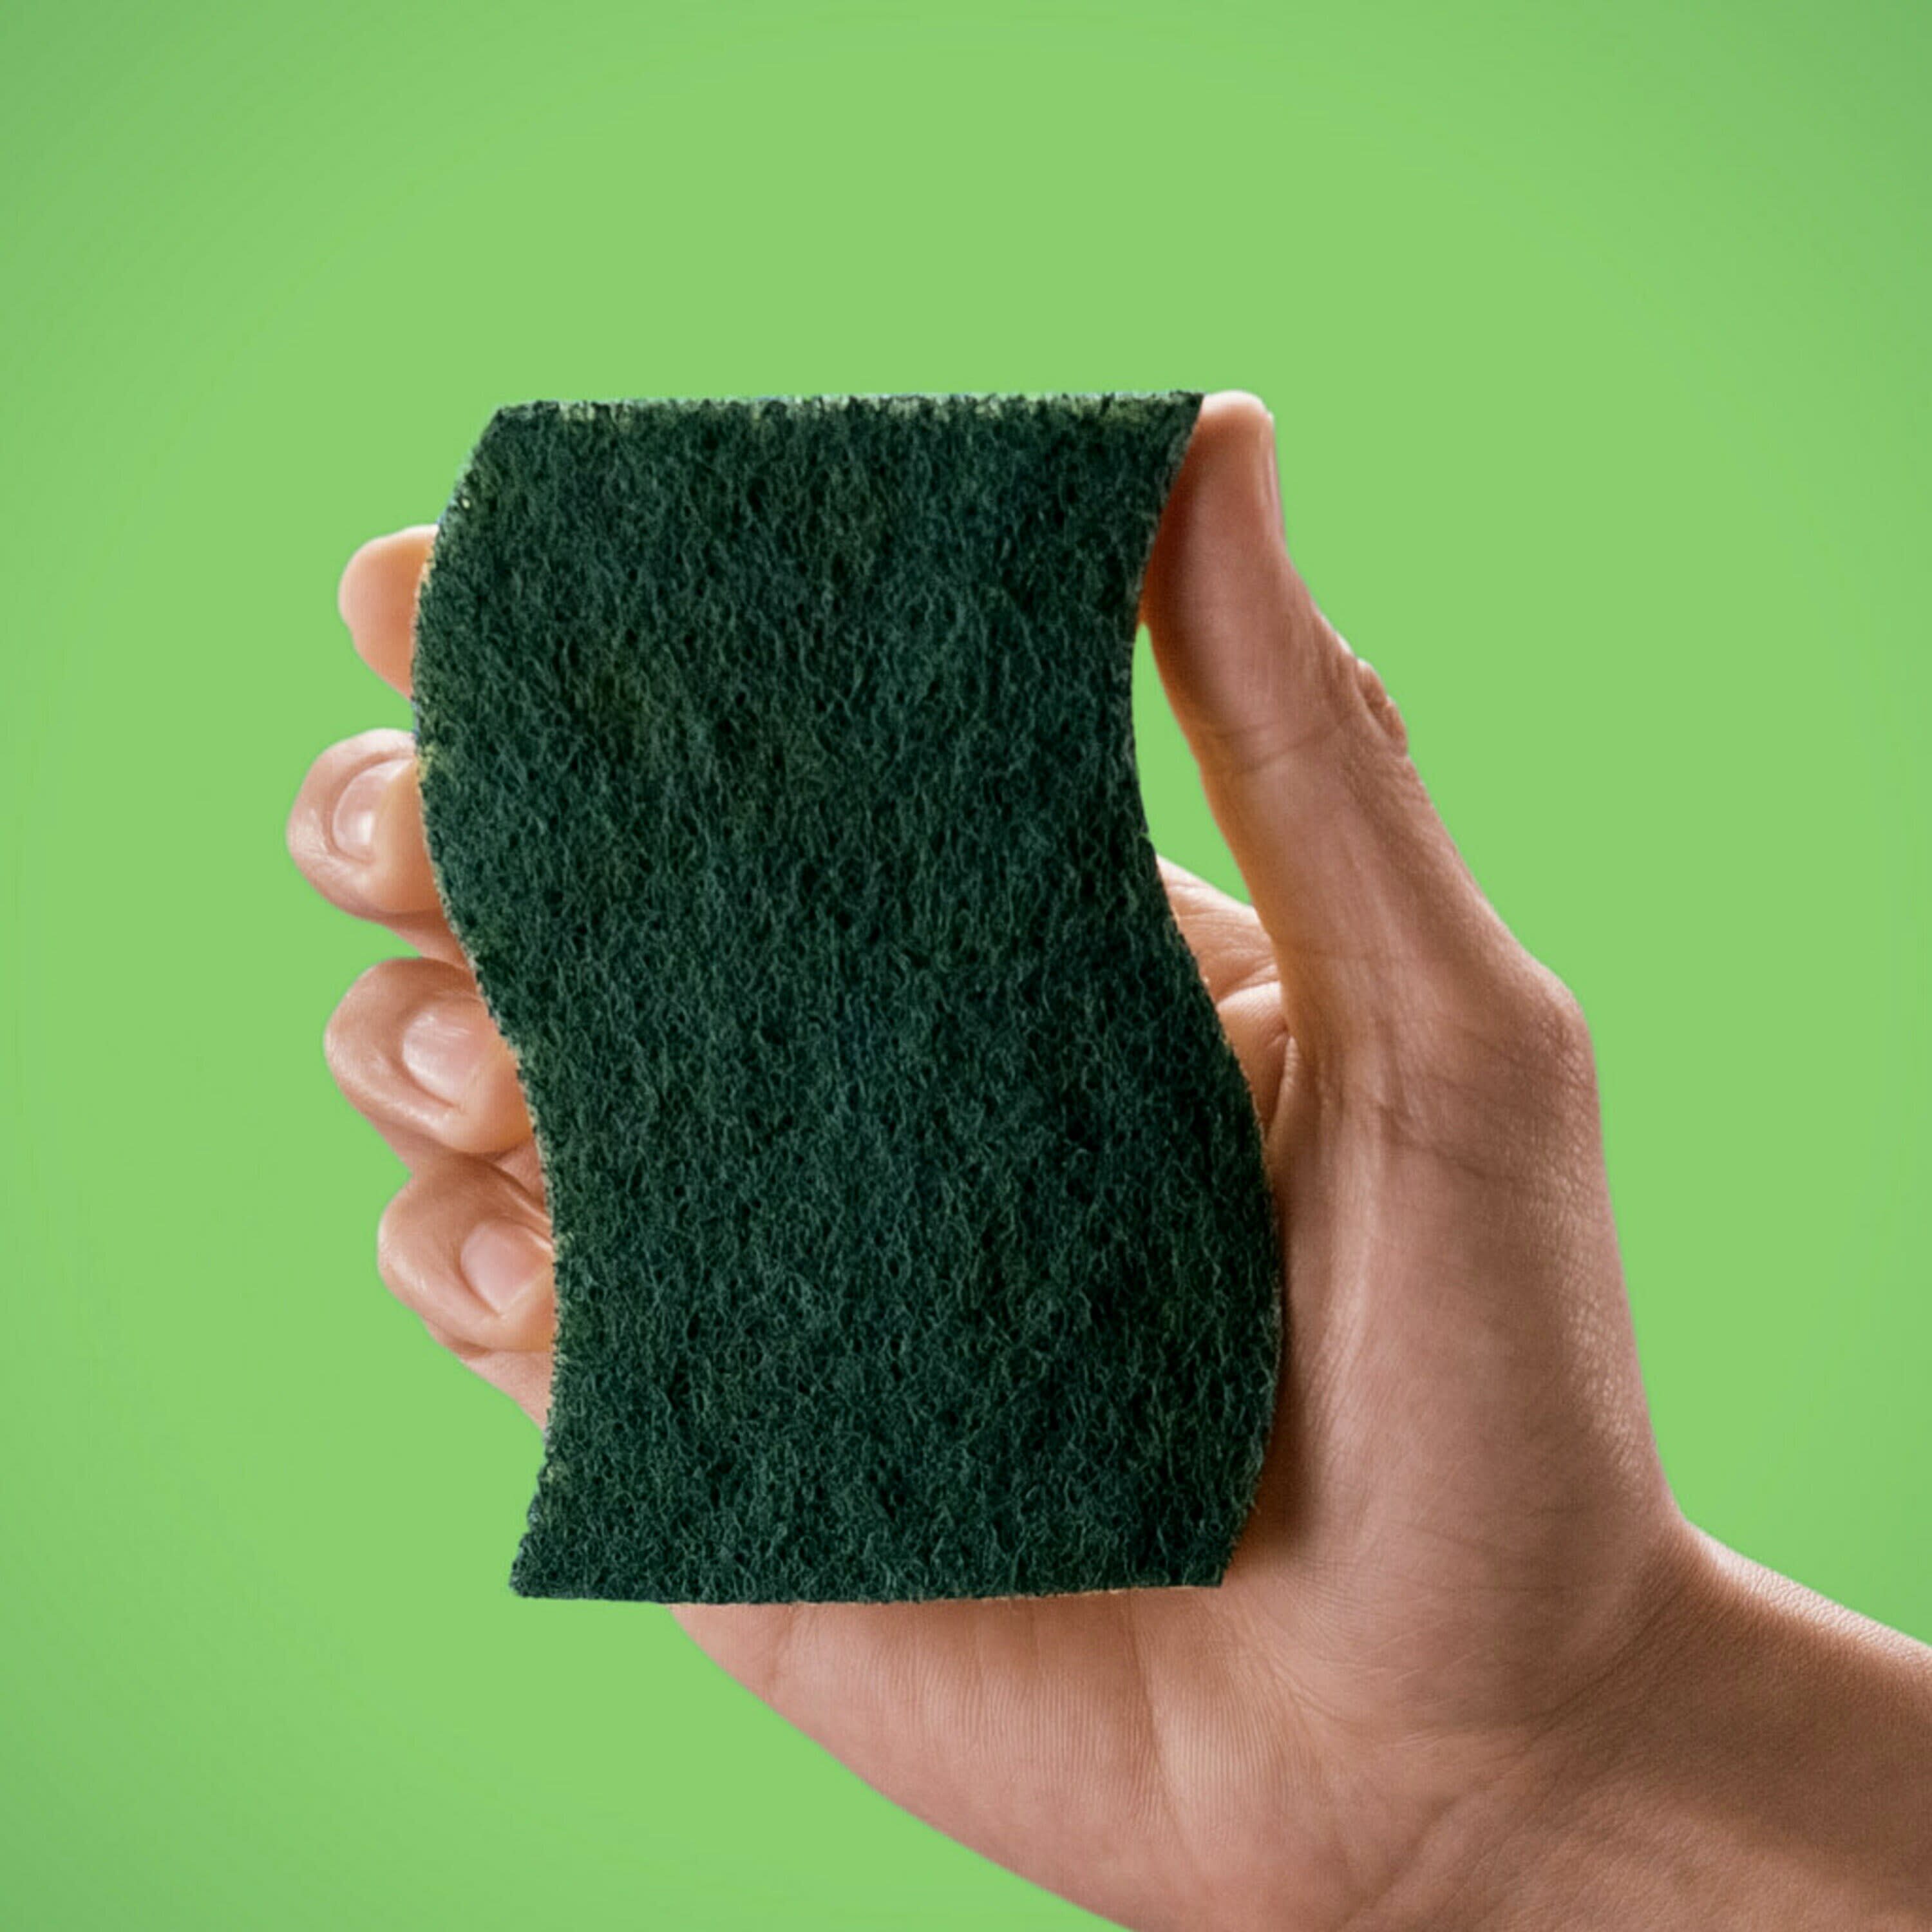 An All-Purpose Sponge That's Better Than Your Average Scotch-Brite